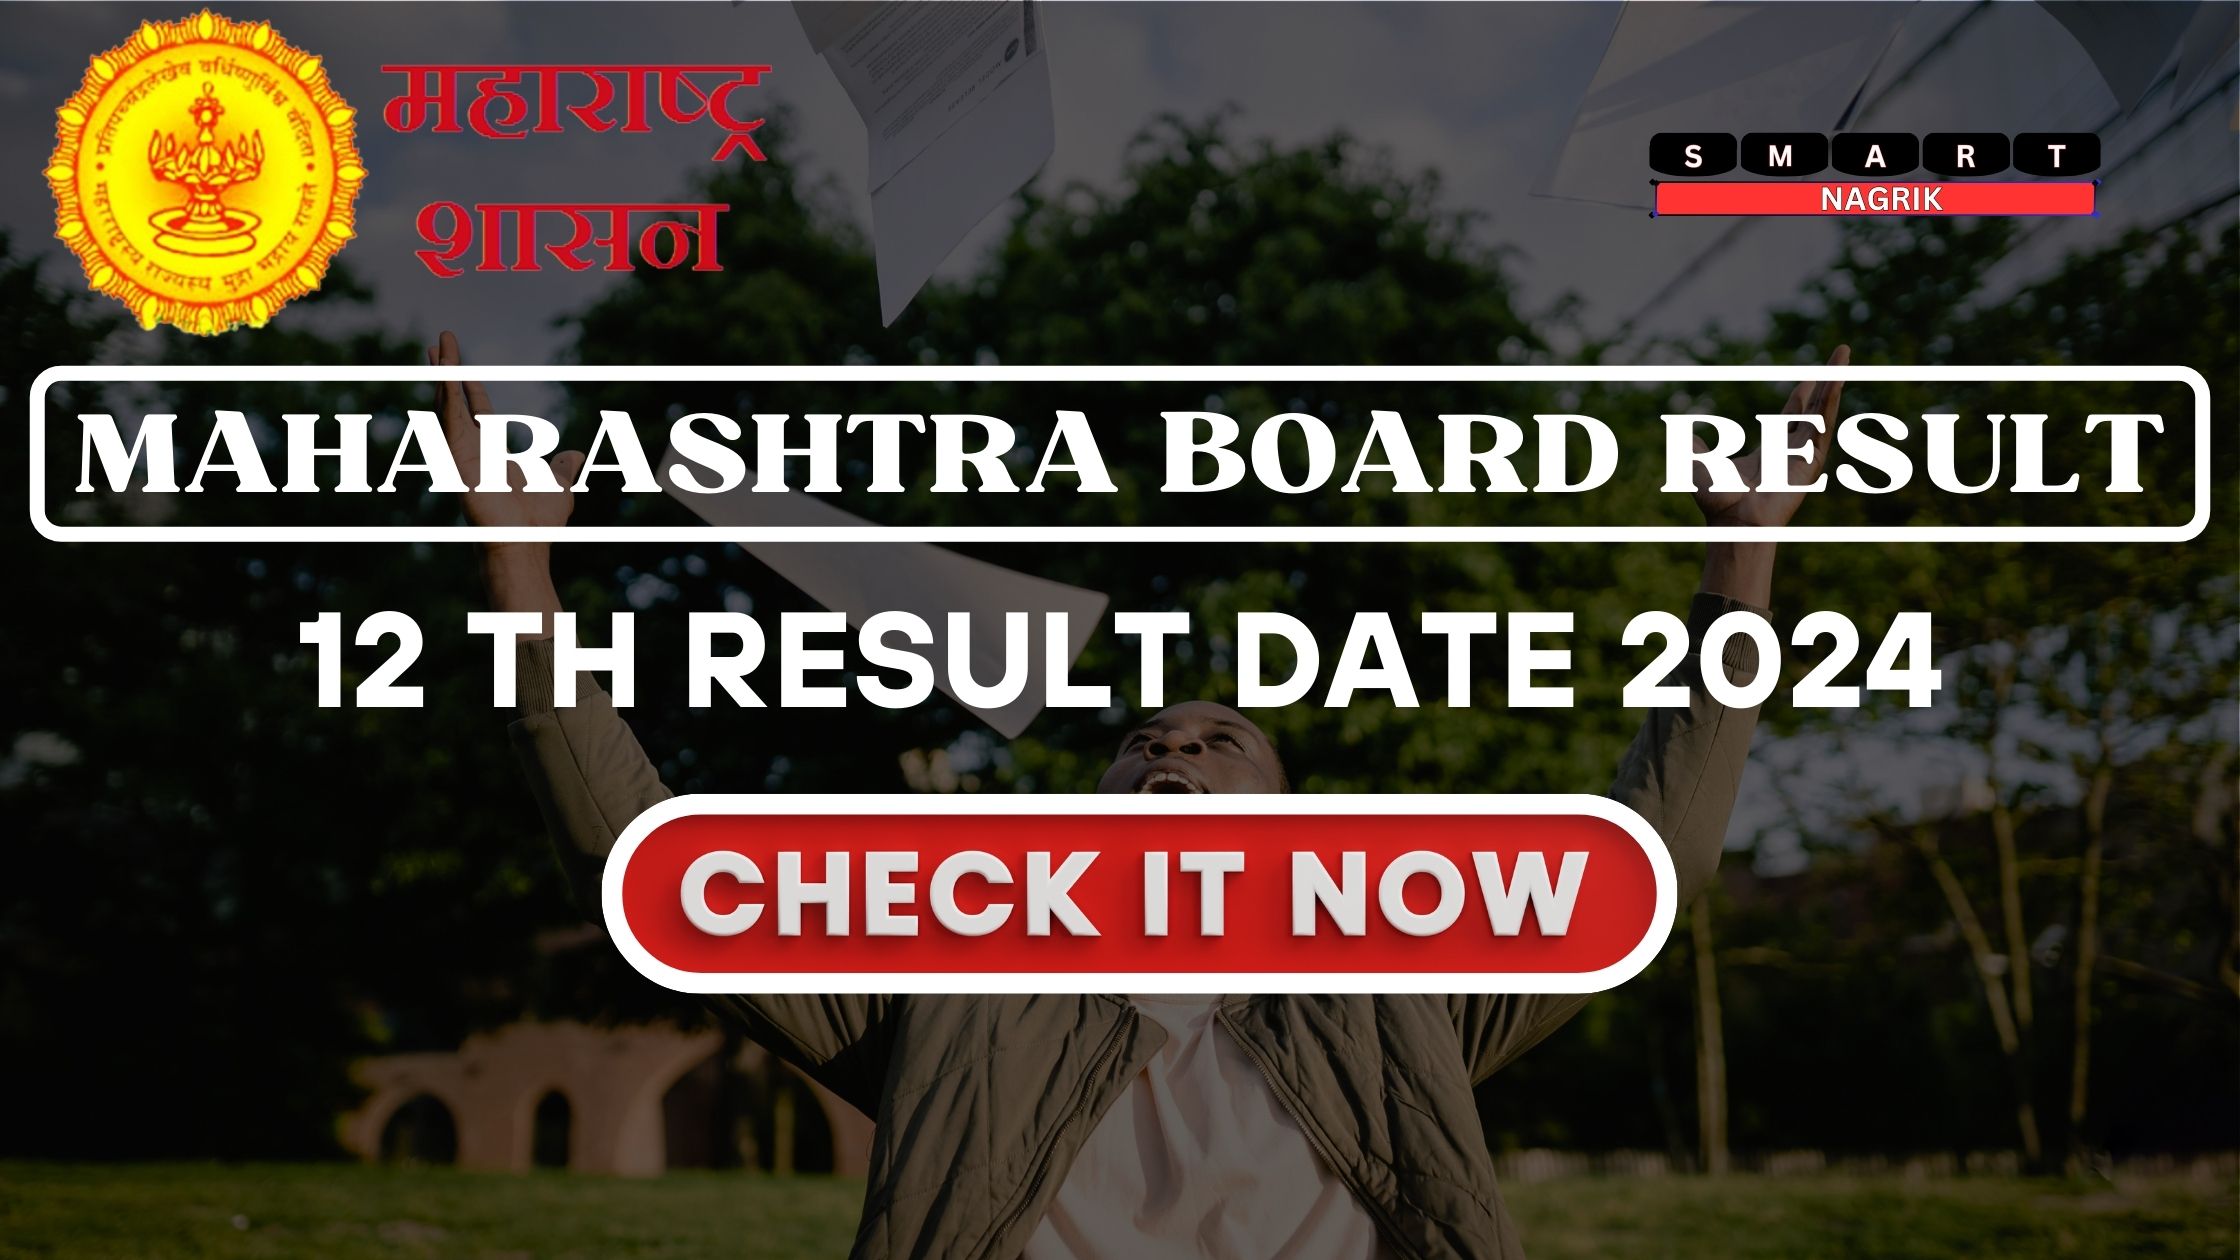 12th Result Date 2024 Maharashtra Board Check Now